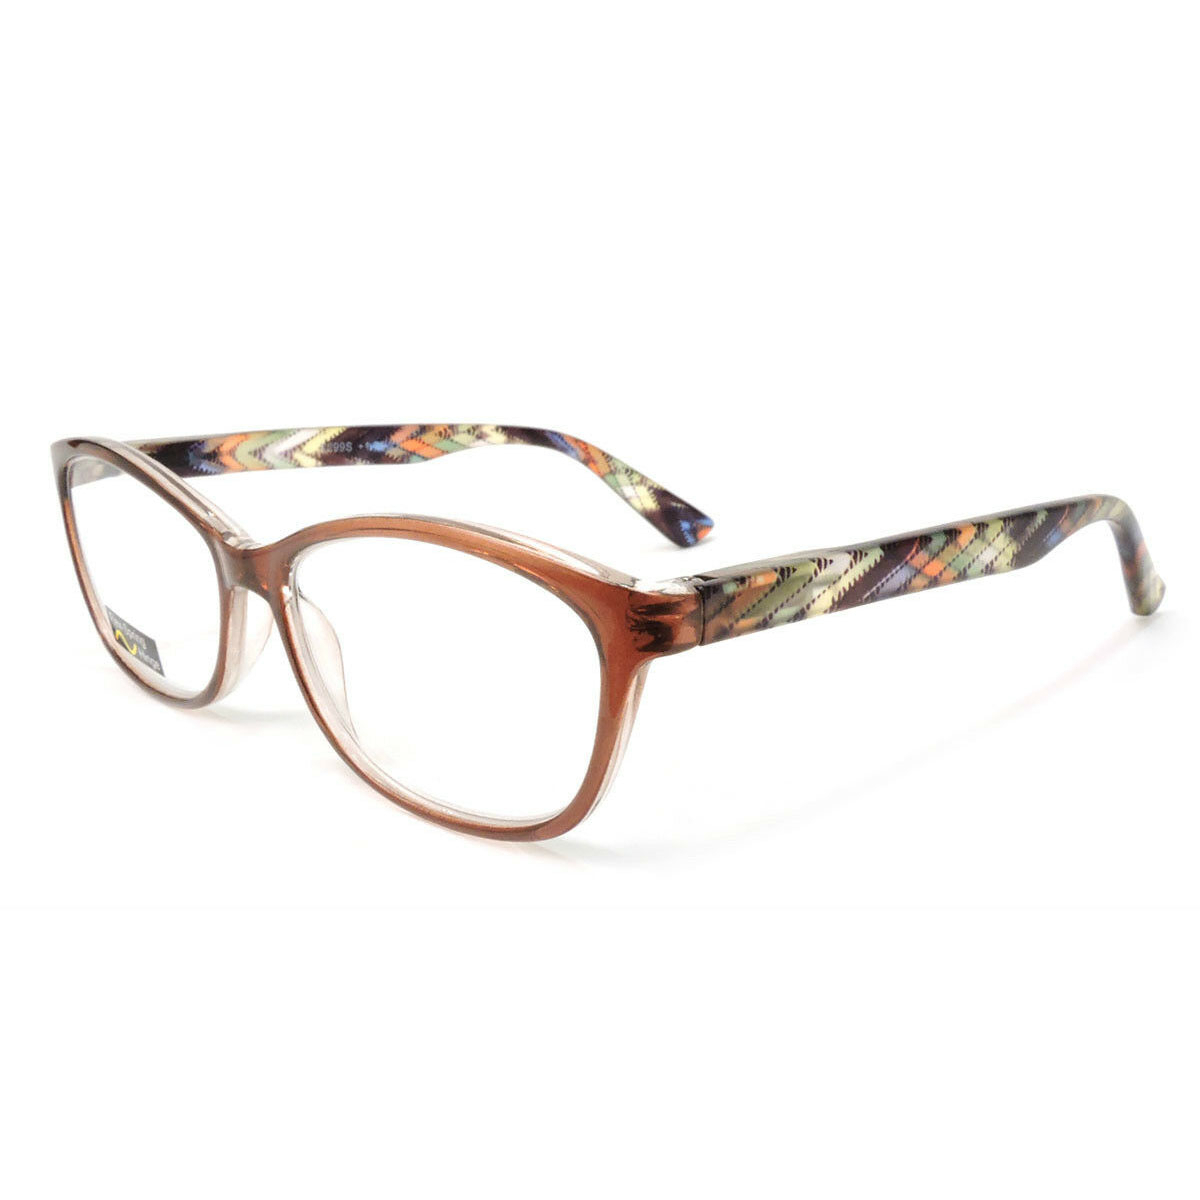 Classic Frame Reading Glasses Colorful Arms Retro Vintage Style - Brown, +1.75